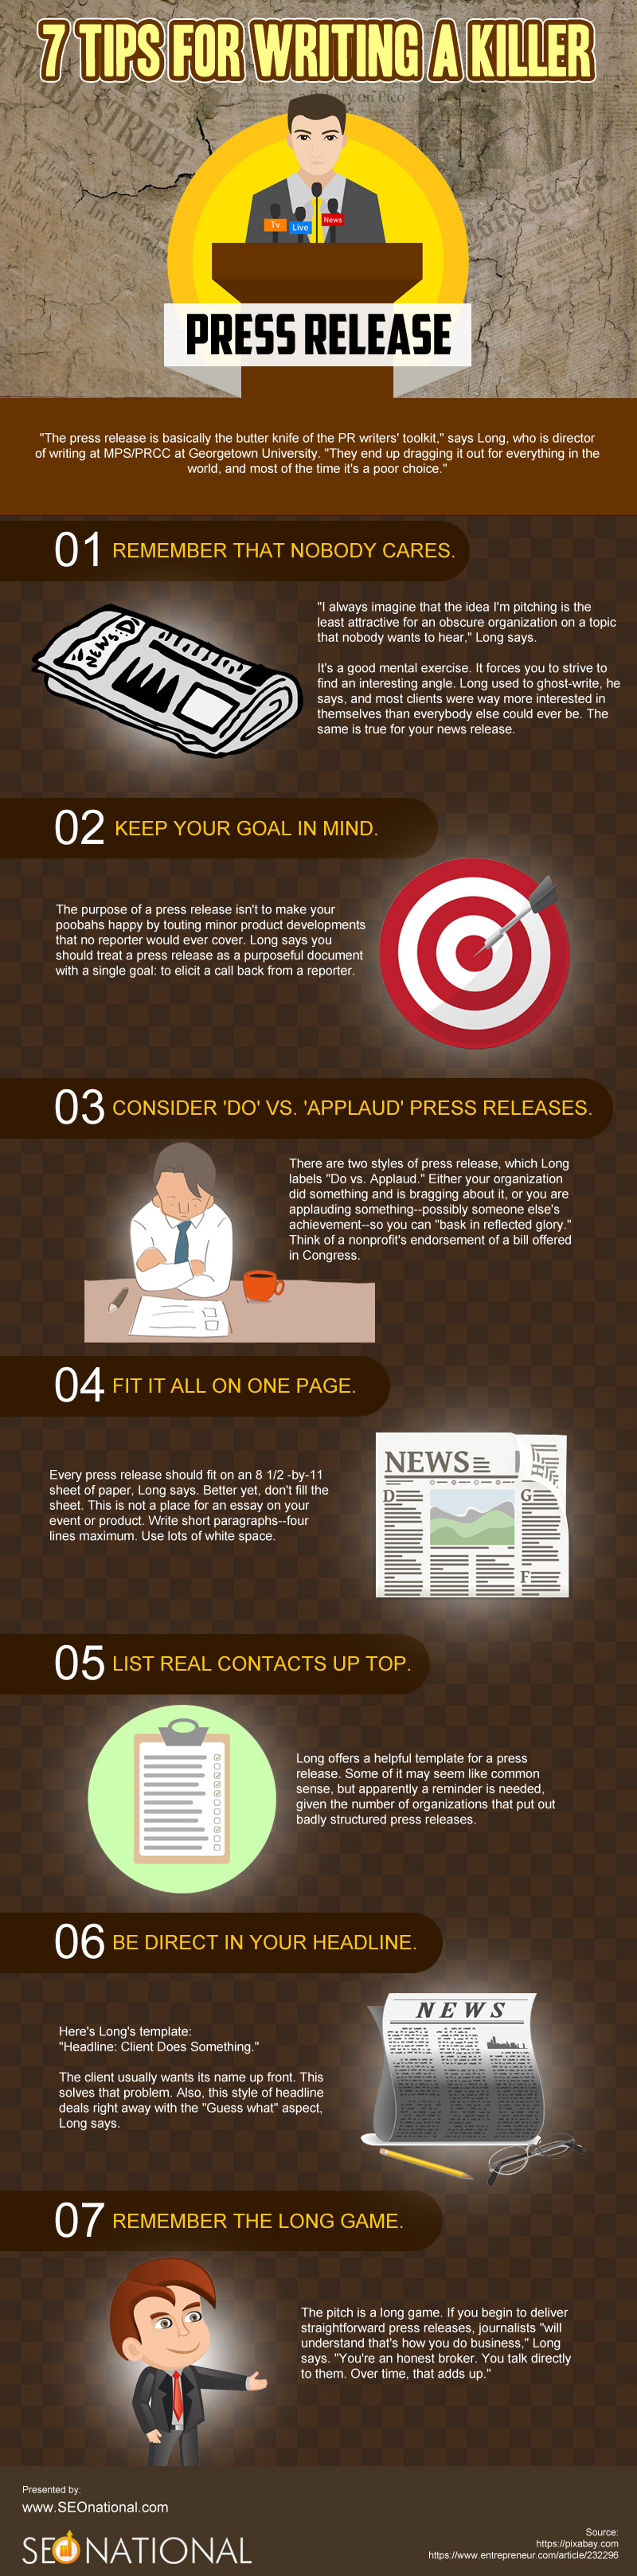 7 Tips for Writing a Killer Press Release [infographic]